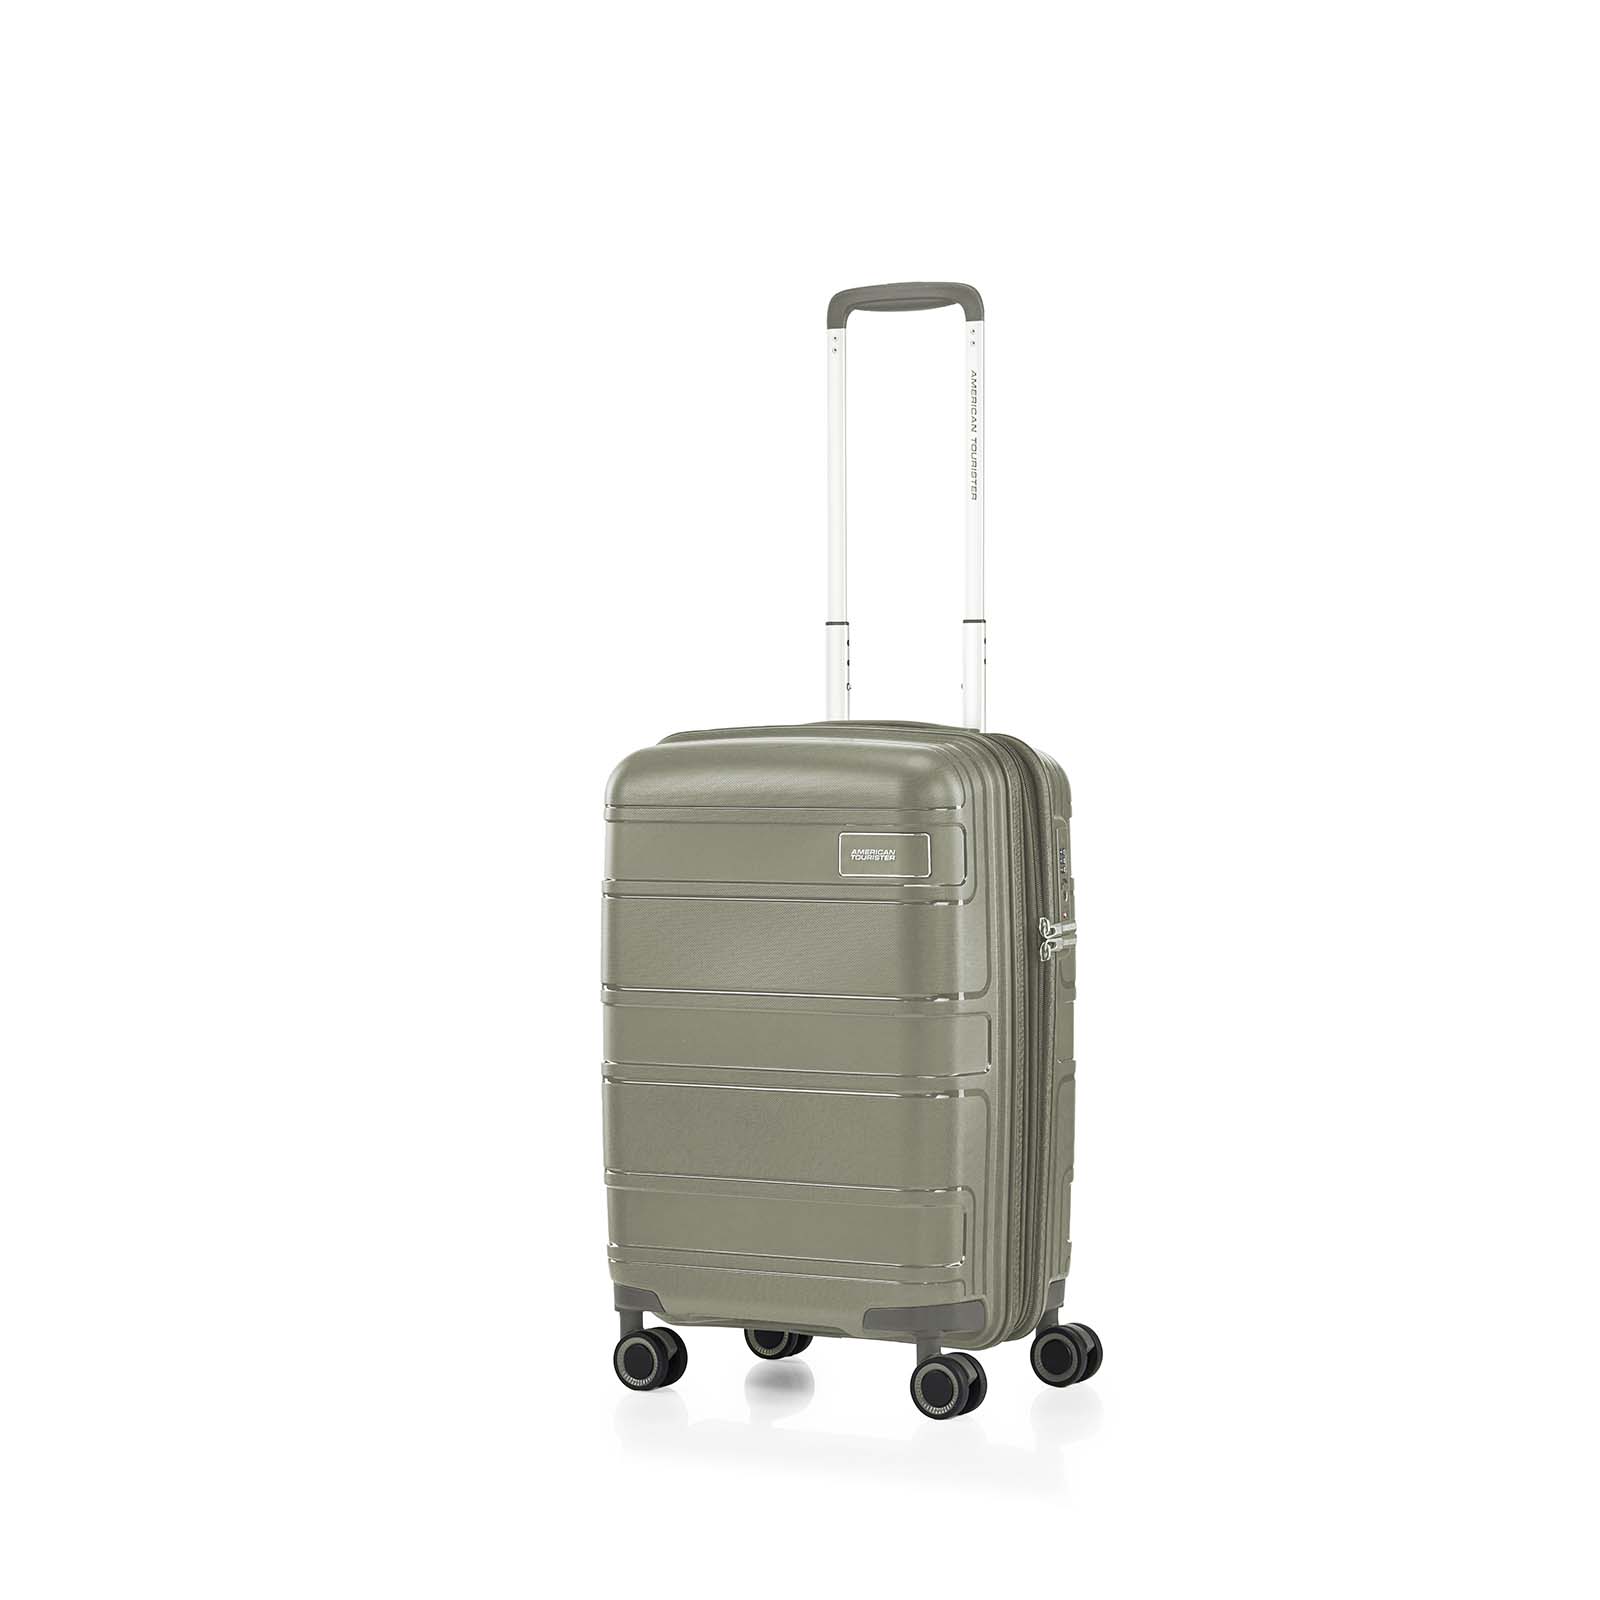 American-Tourister-Light-Max-55cm-Carry-On-Suitcase-Khaki-Angle